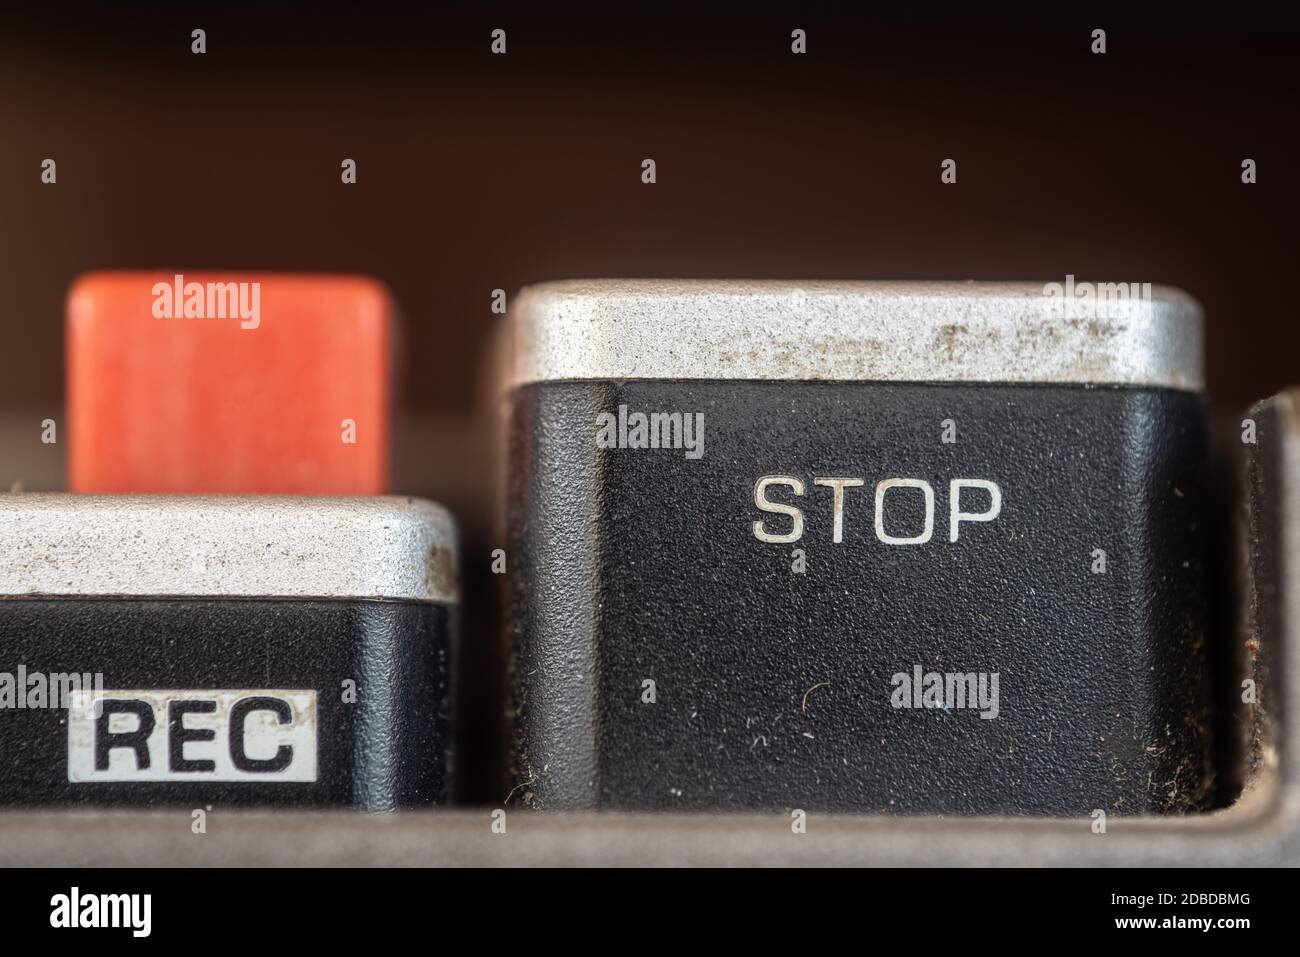 Close up of Rec and Stop buttons of a dirty old 1970s style cassette player radio Stock Photo